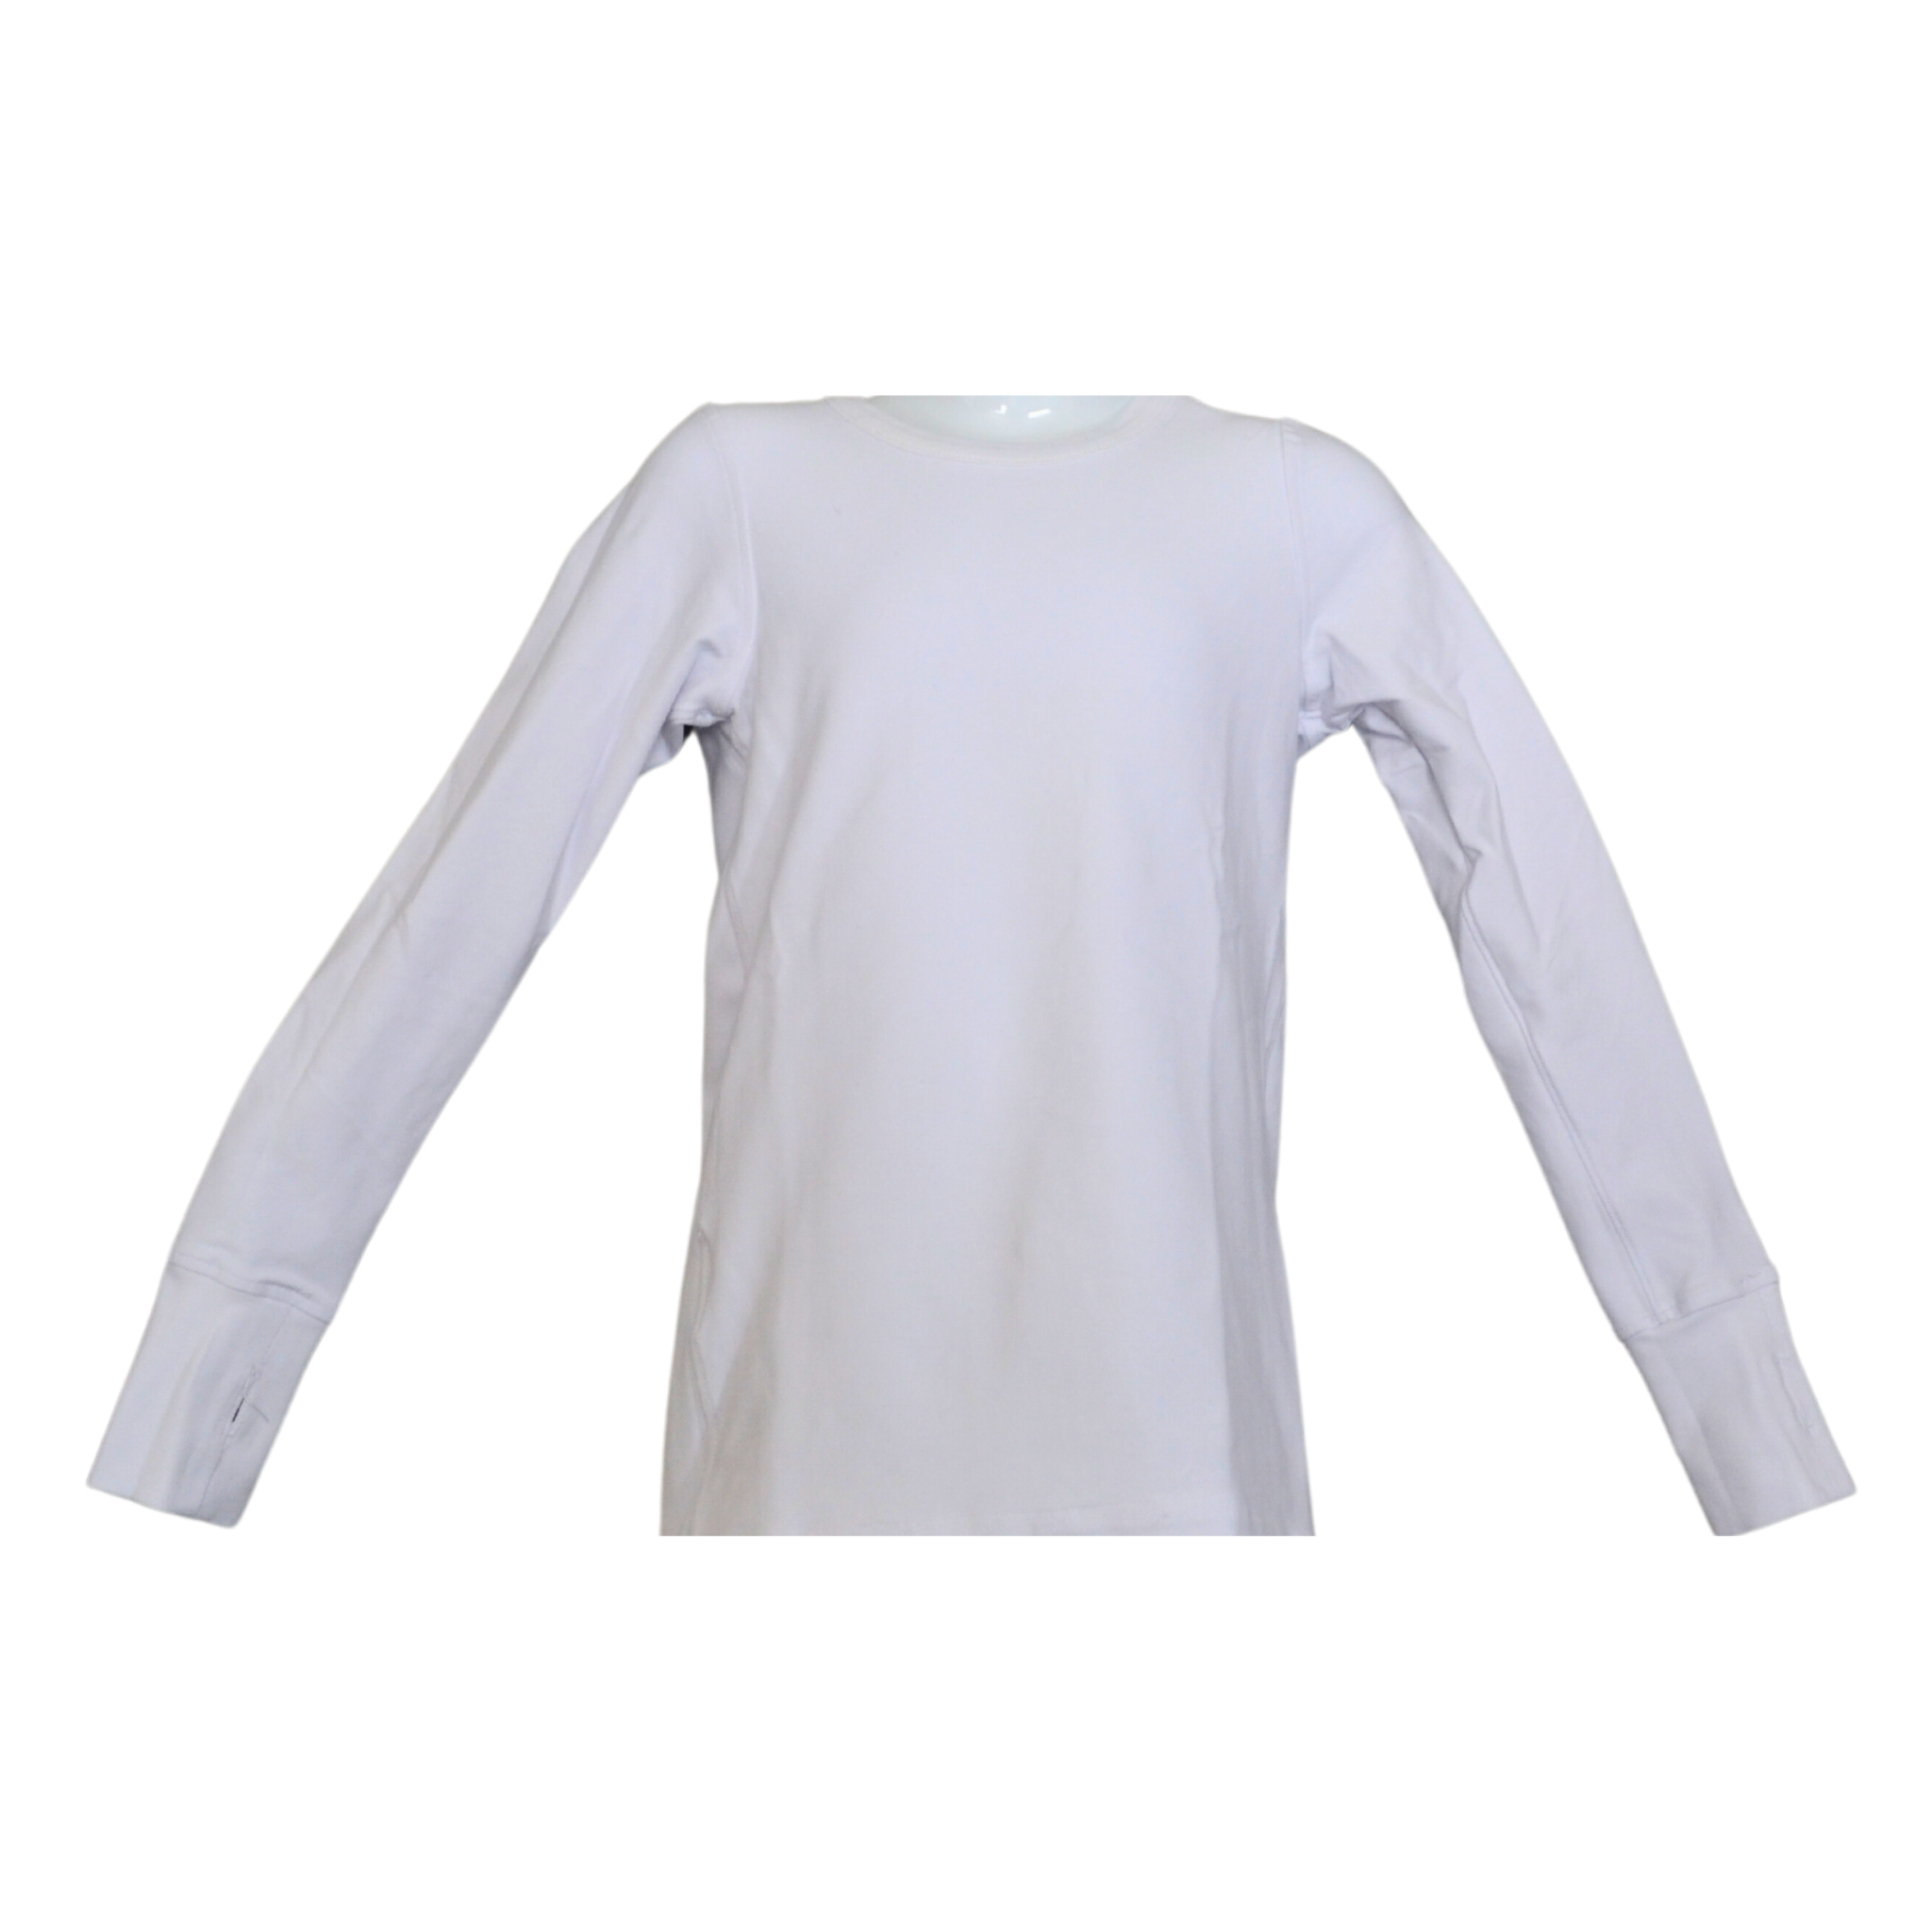 Calming Clothing - Therapeutic Long Sleeve Top - Medium to Firm Compression